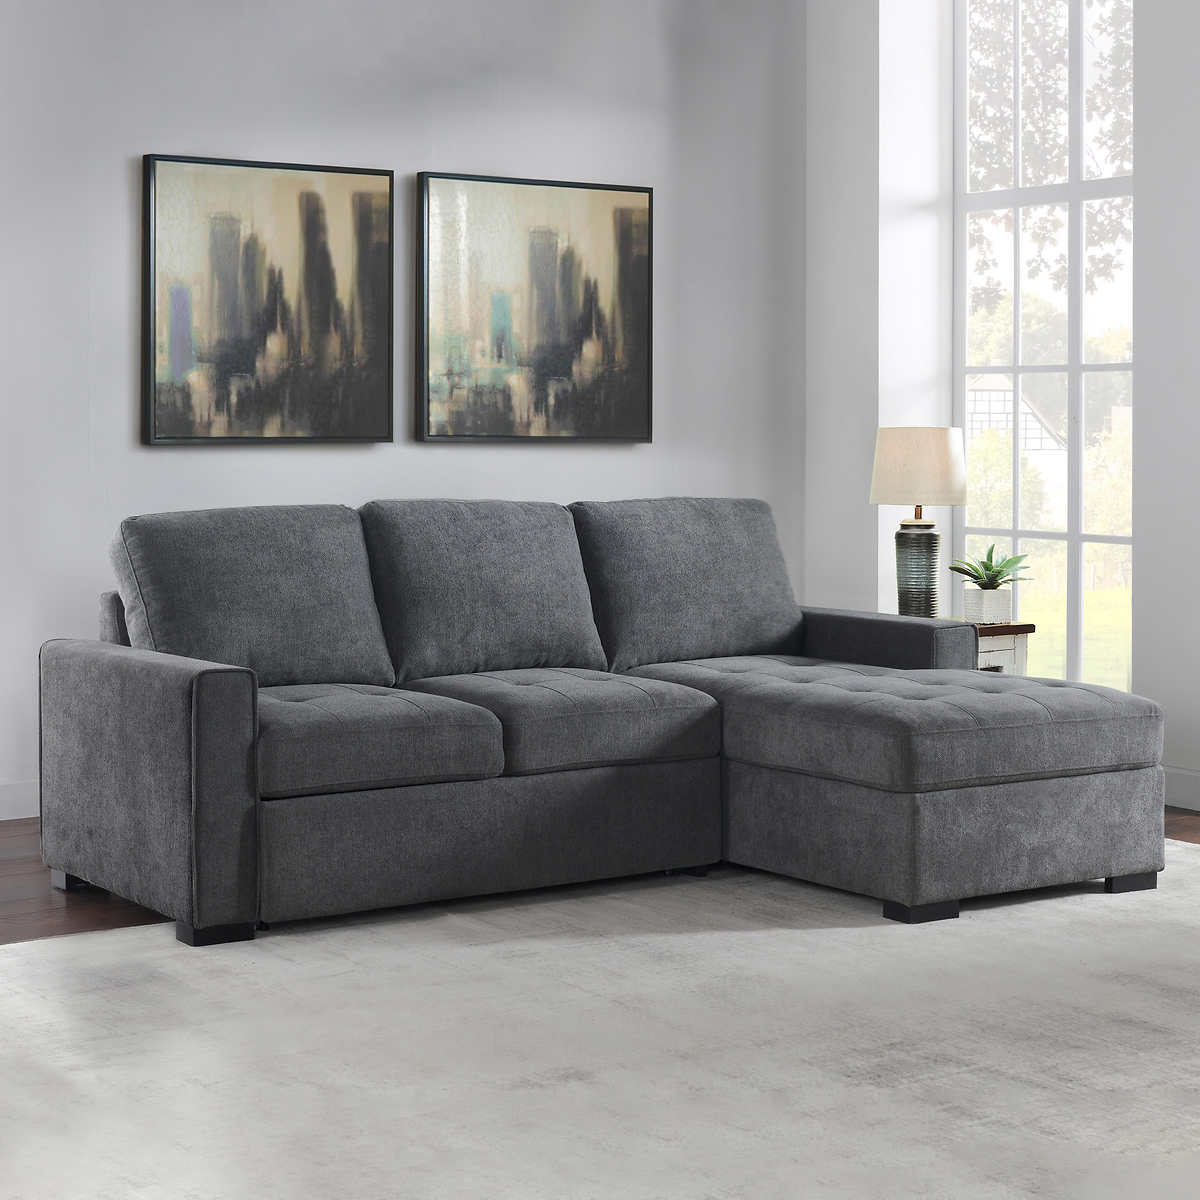 Kendale Sleeper Sofa With Storage, Bandlon Sofa Chaise With Pull Out Sleeper And Storage Rack